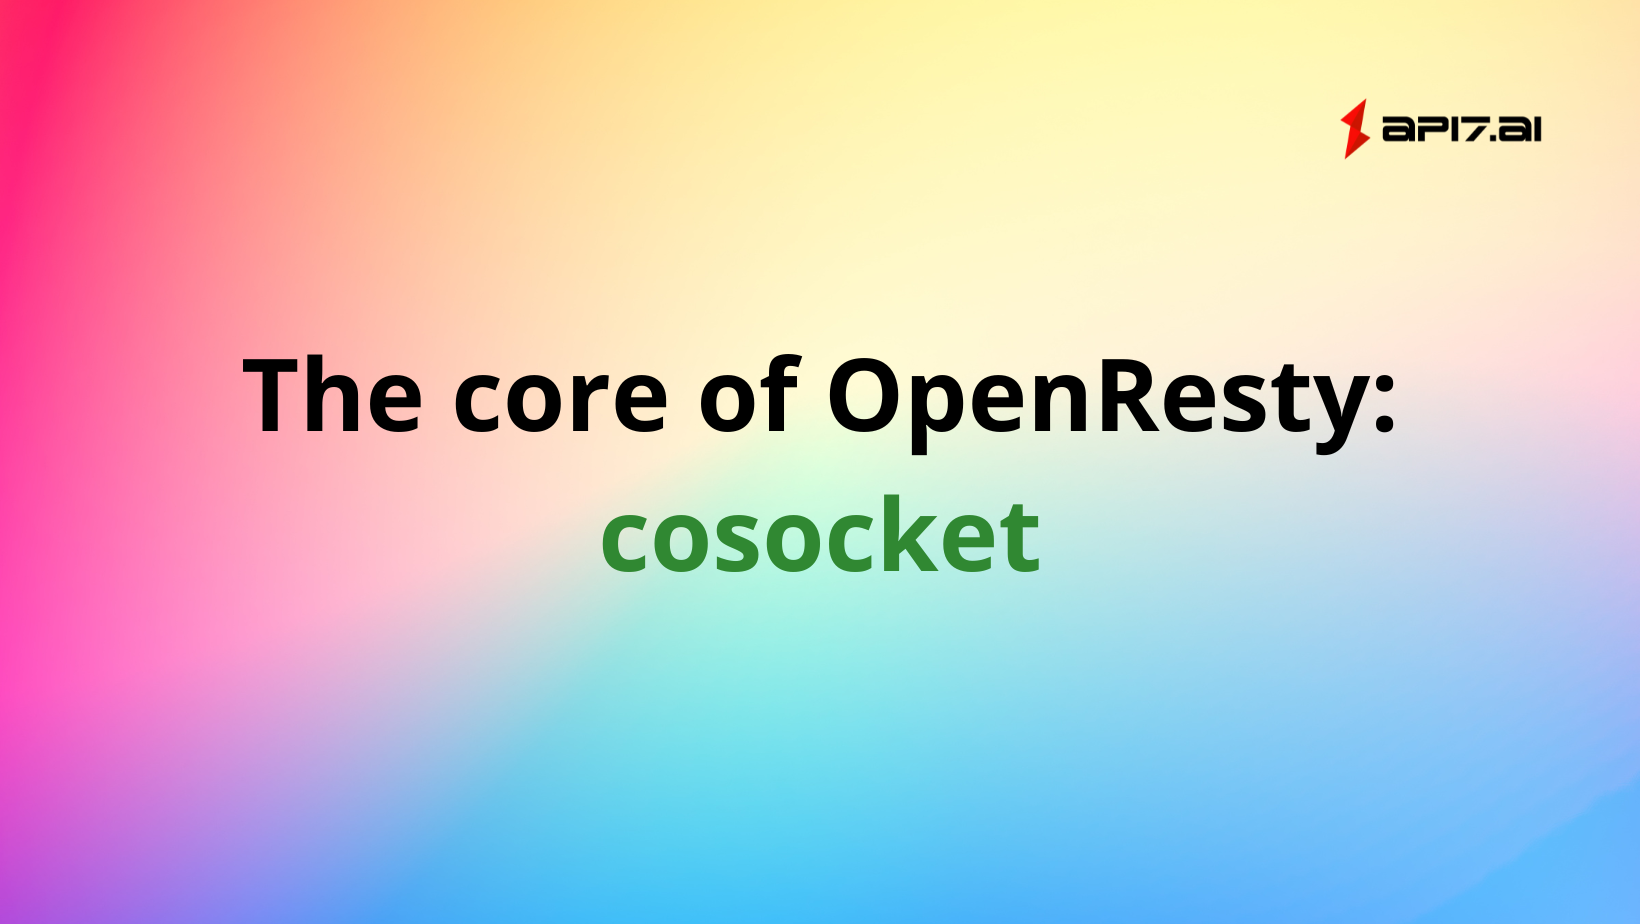 The core of OpenResty: cosocket